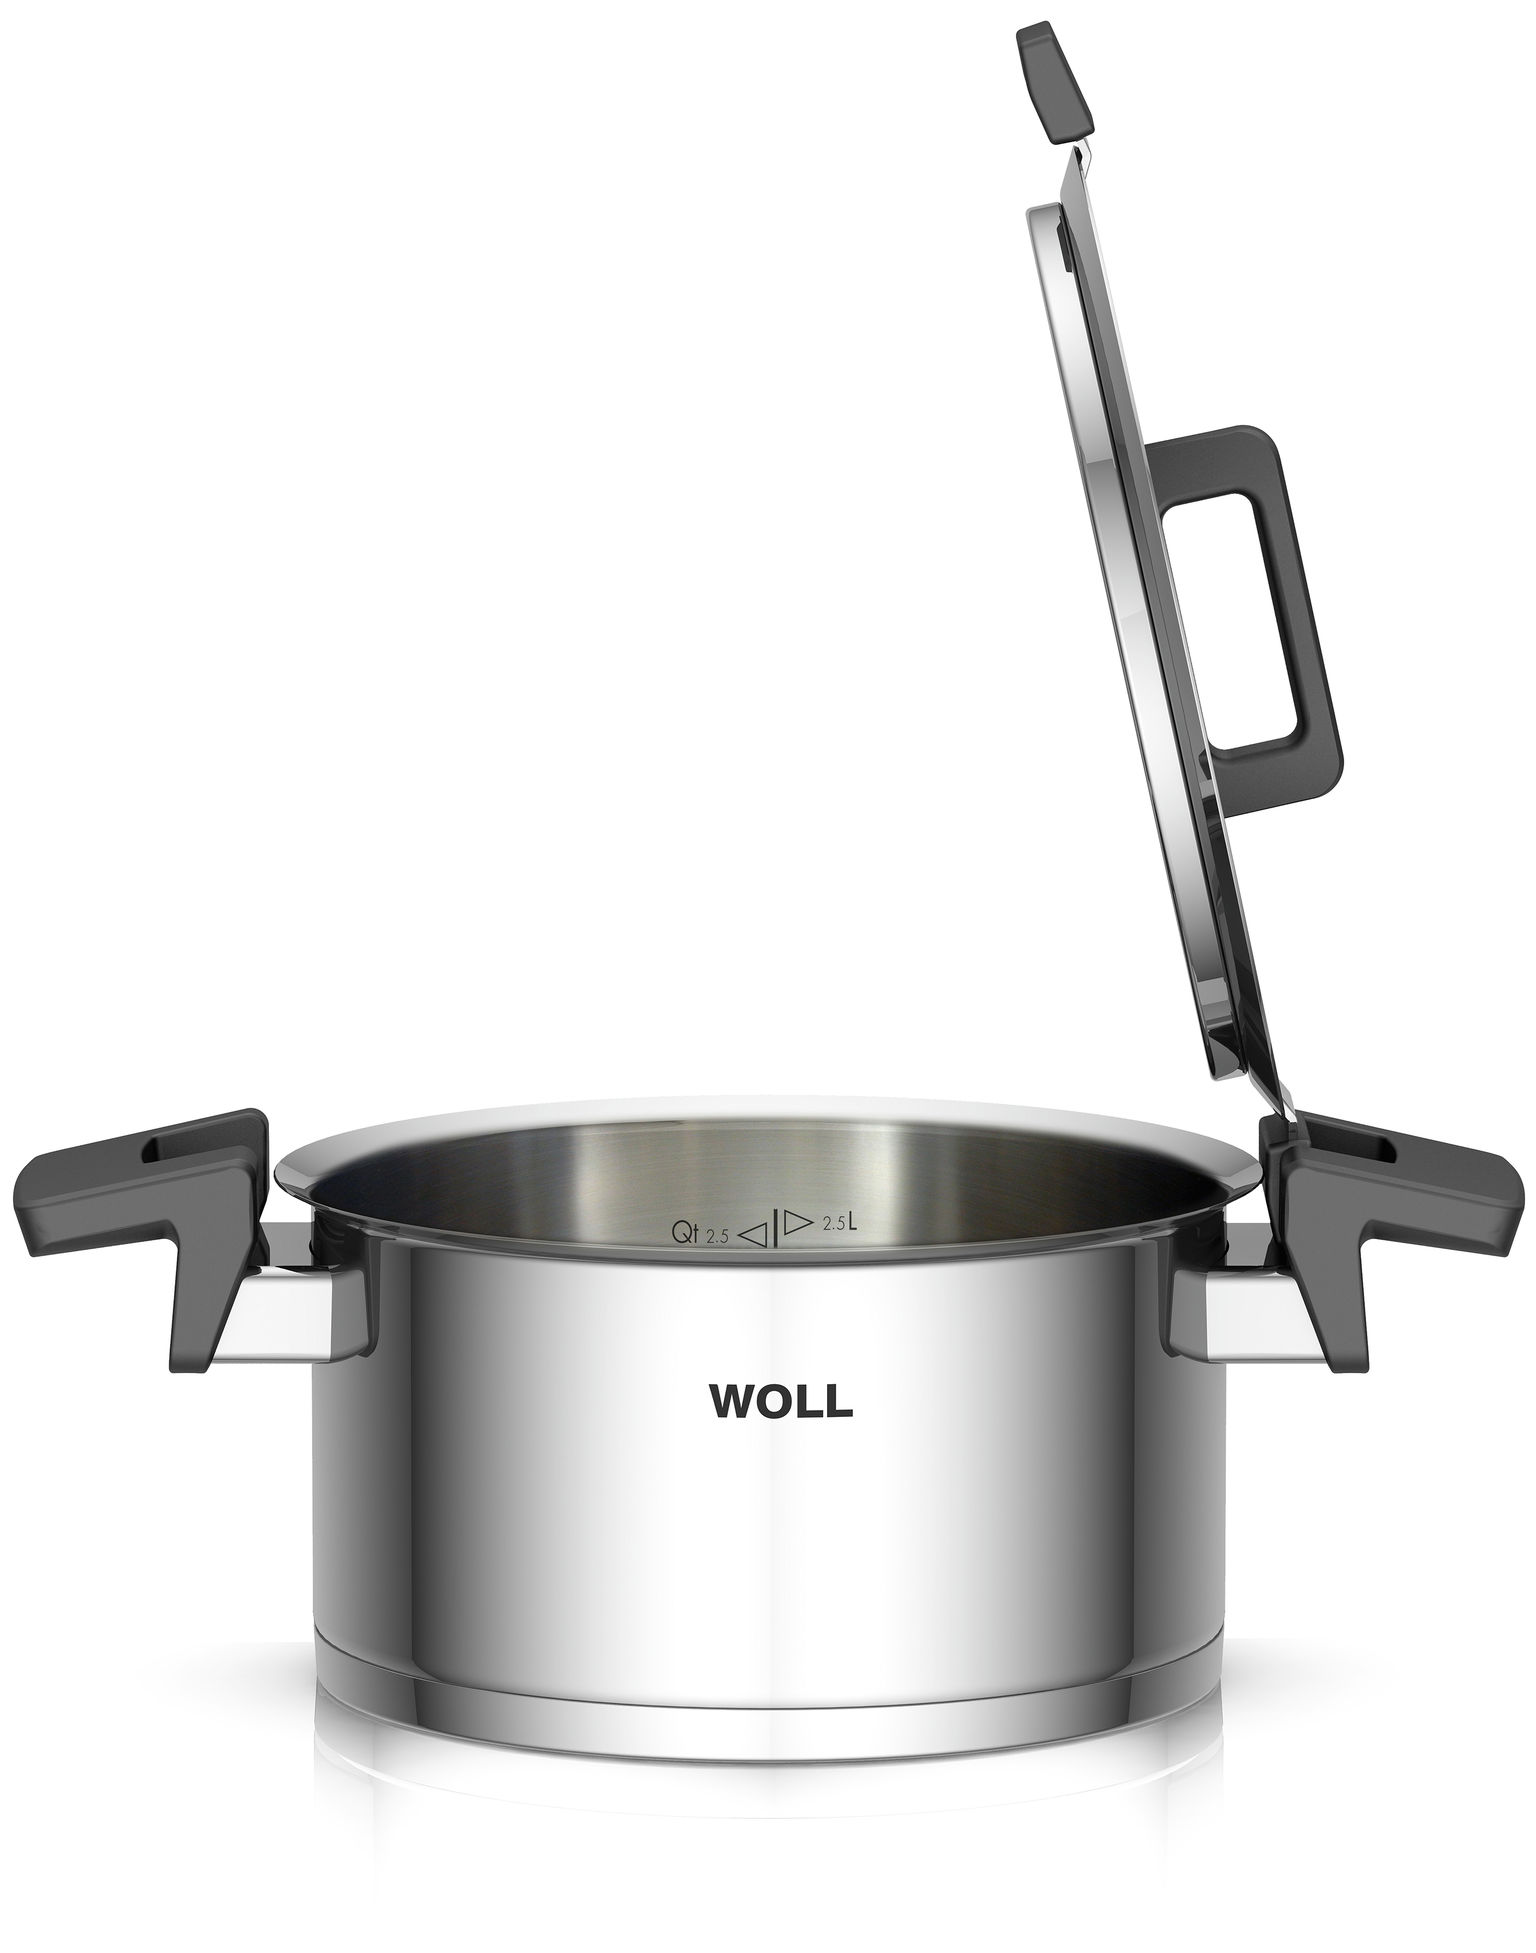 Woll Cookware South Africa